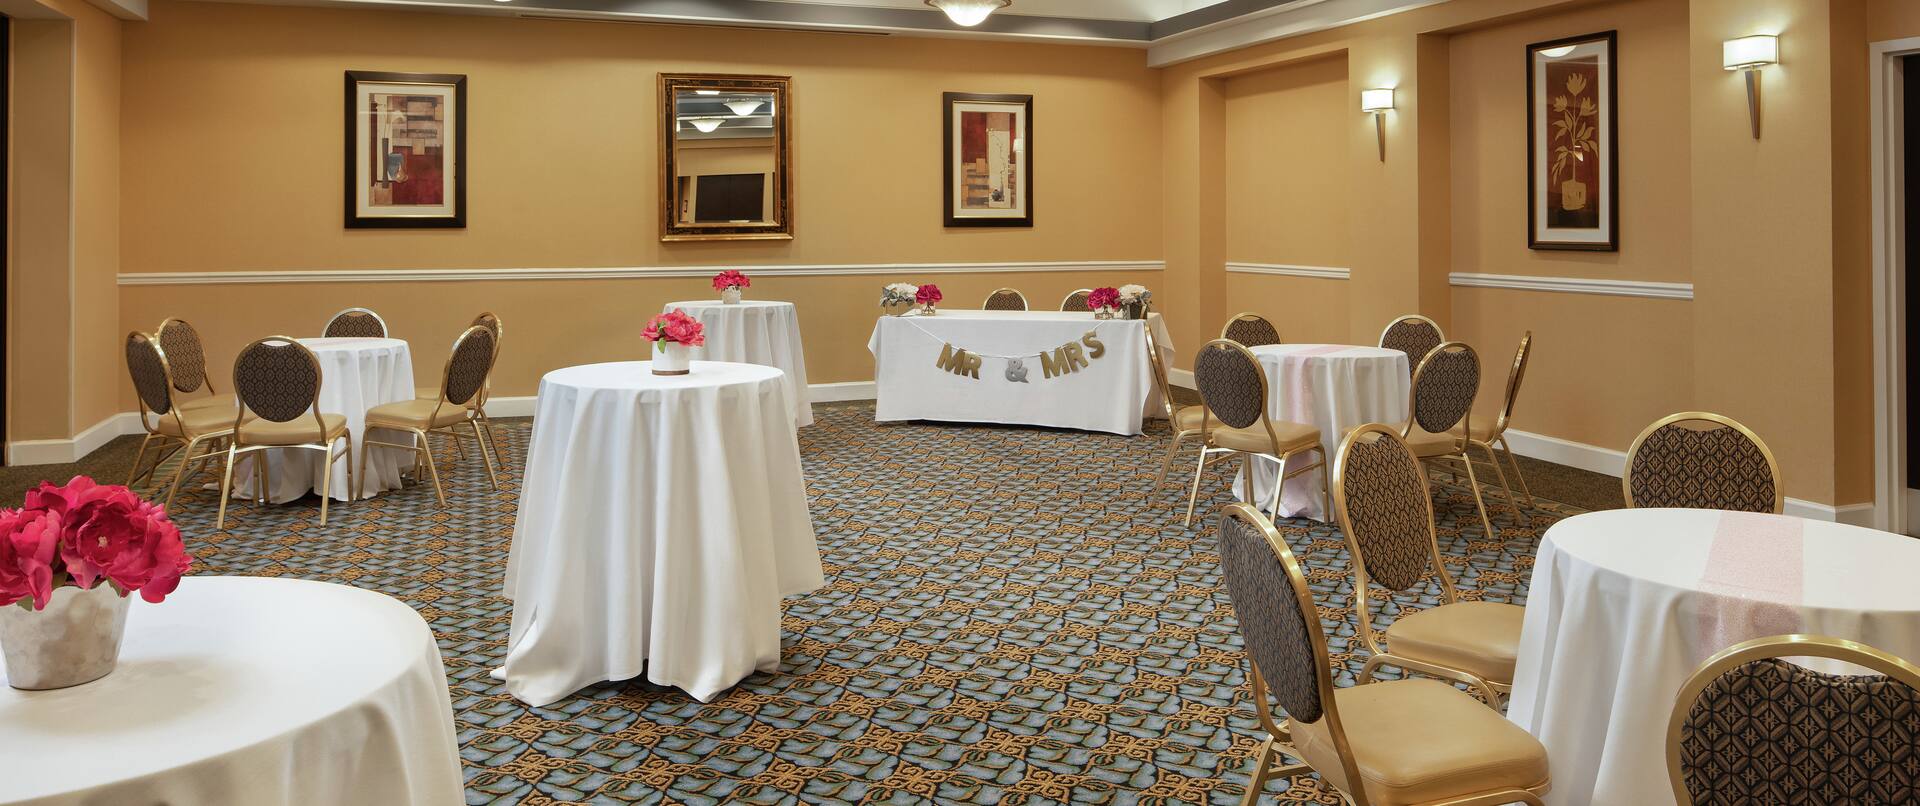 Crystal City Embassy Suites Wedding Setup Meeting Space ?impolicy=crop&cw=4344&ch=1823&gravity=NorthWest&xposition=0&yposition=536&rw=1920&rh=806